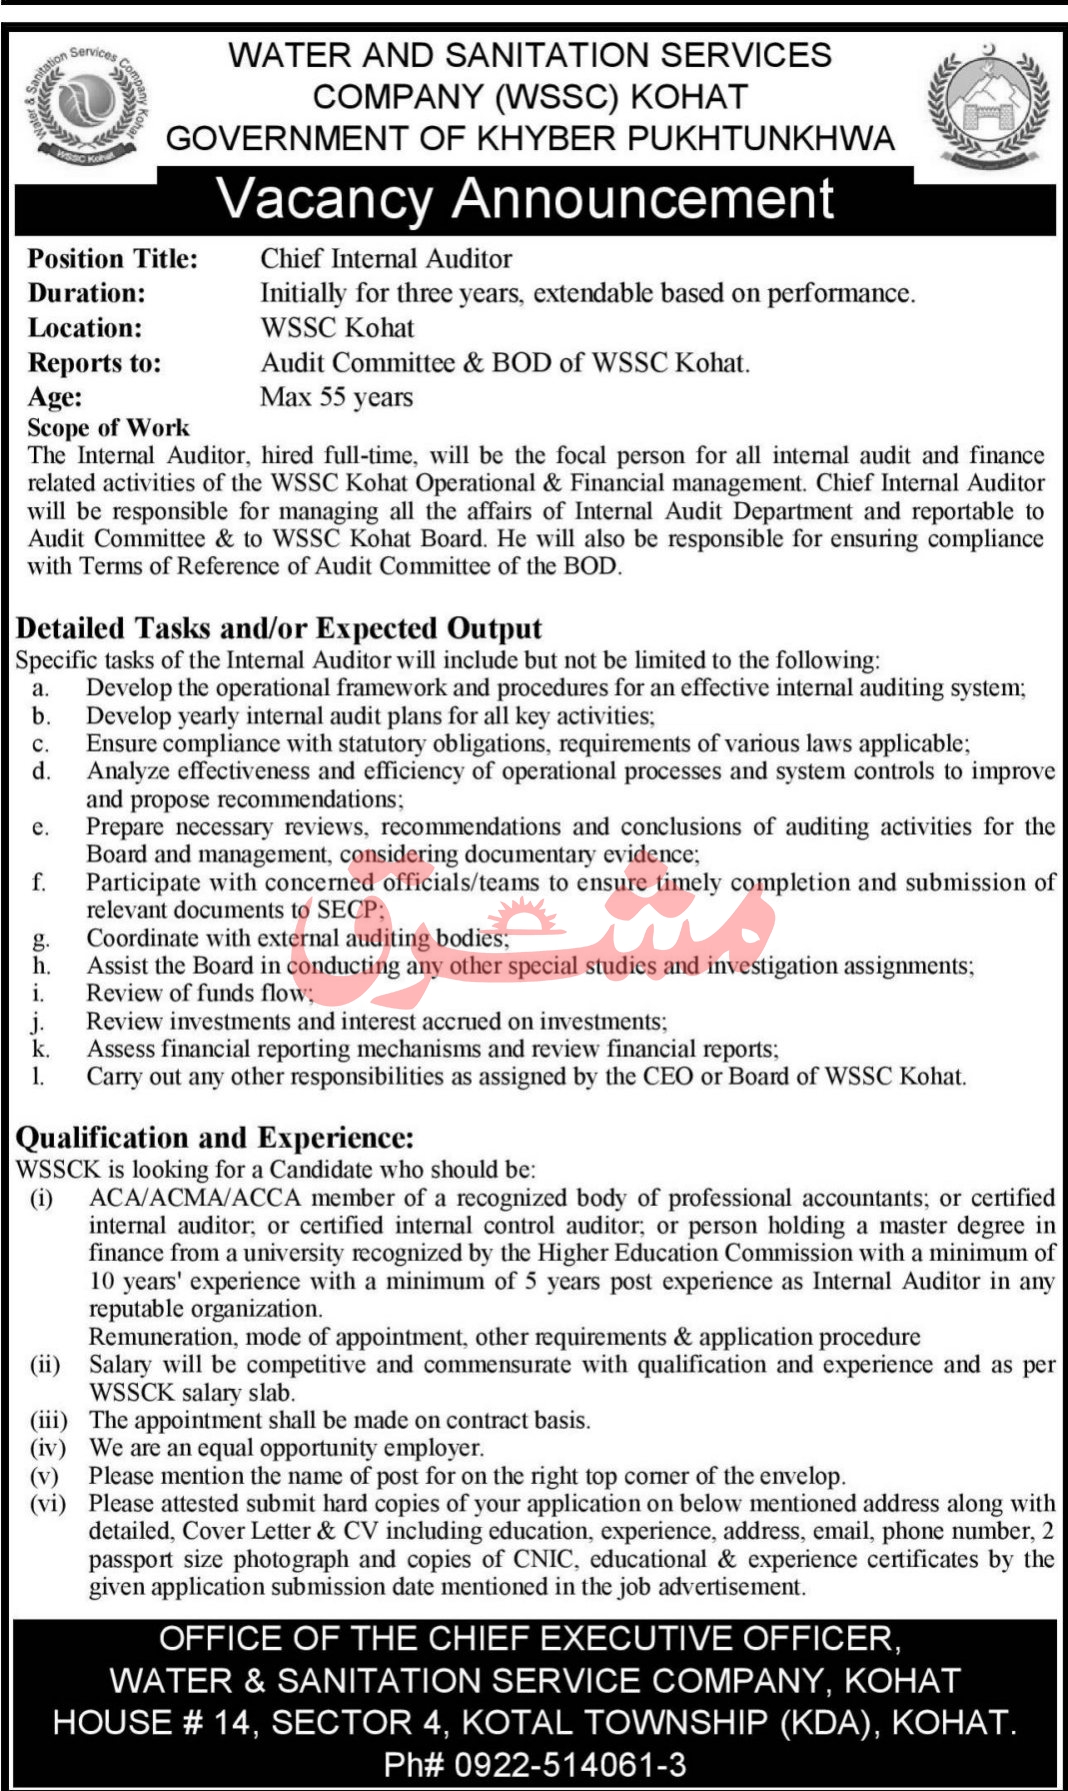 Water And Sanitation Services Company Jobs October 2020